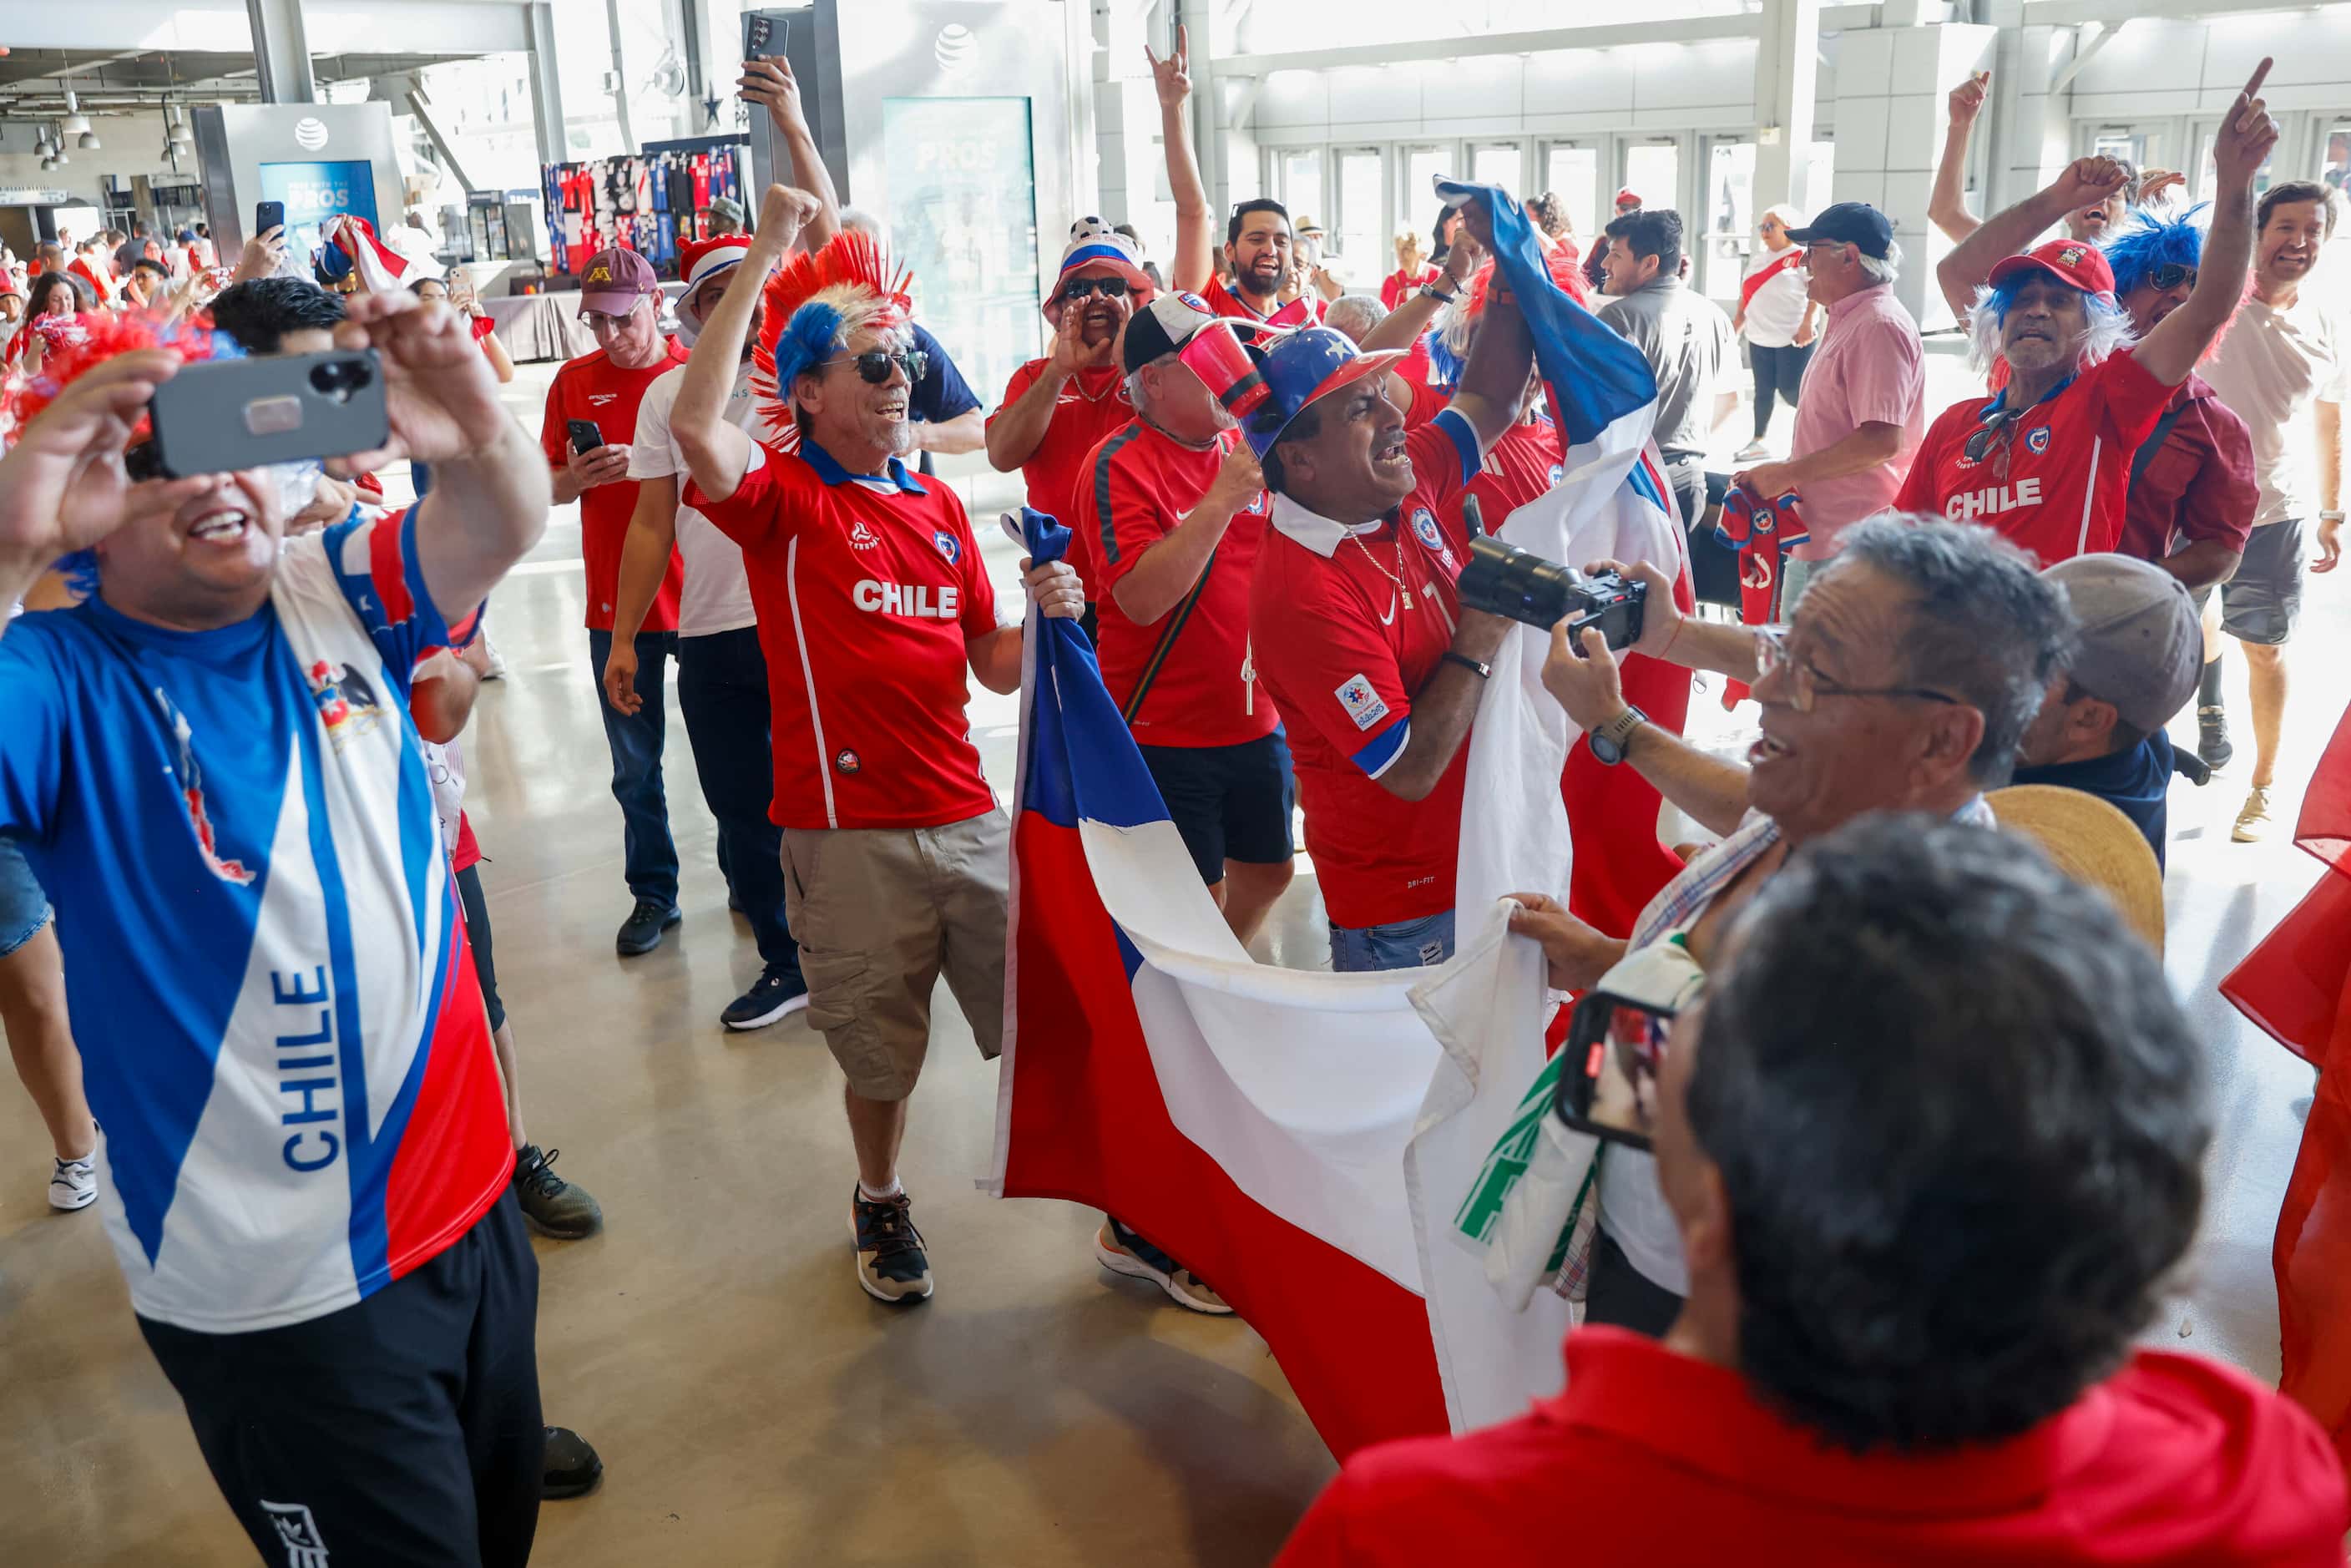 Chile soccer fans dance and sing on the concourse of AT&T Stadium before a Copa America...